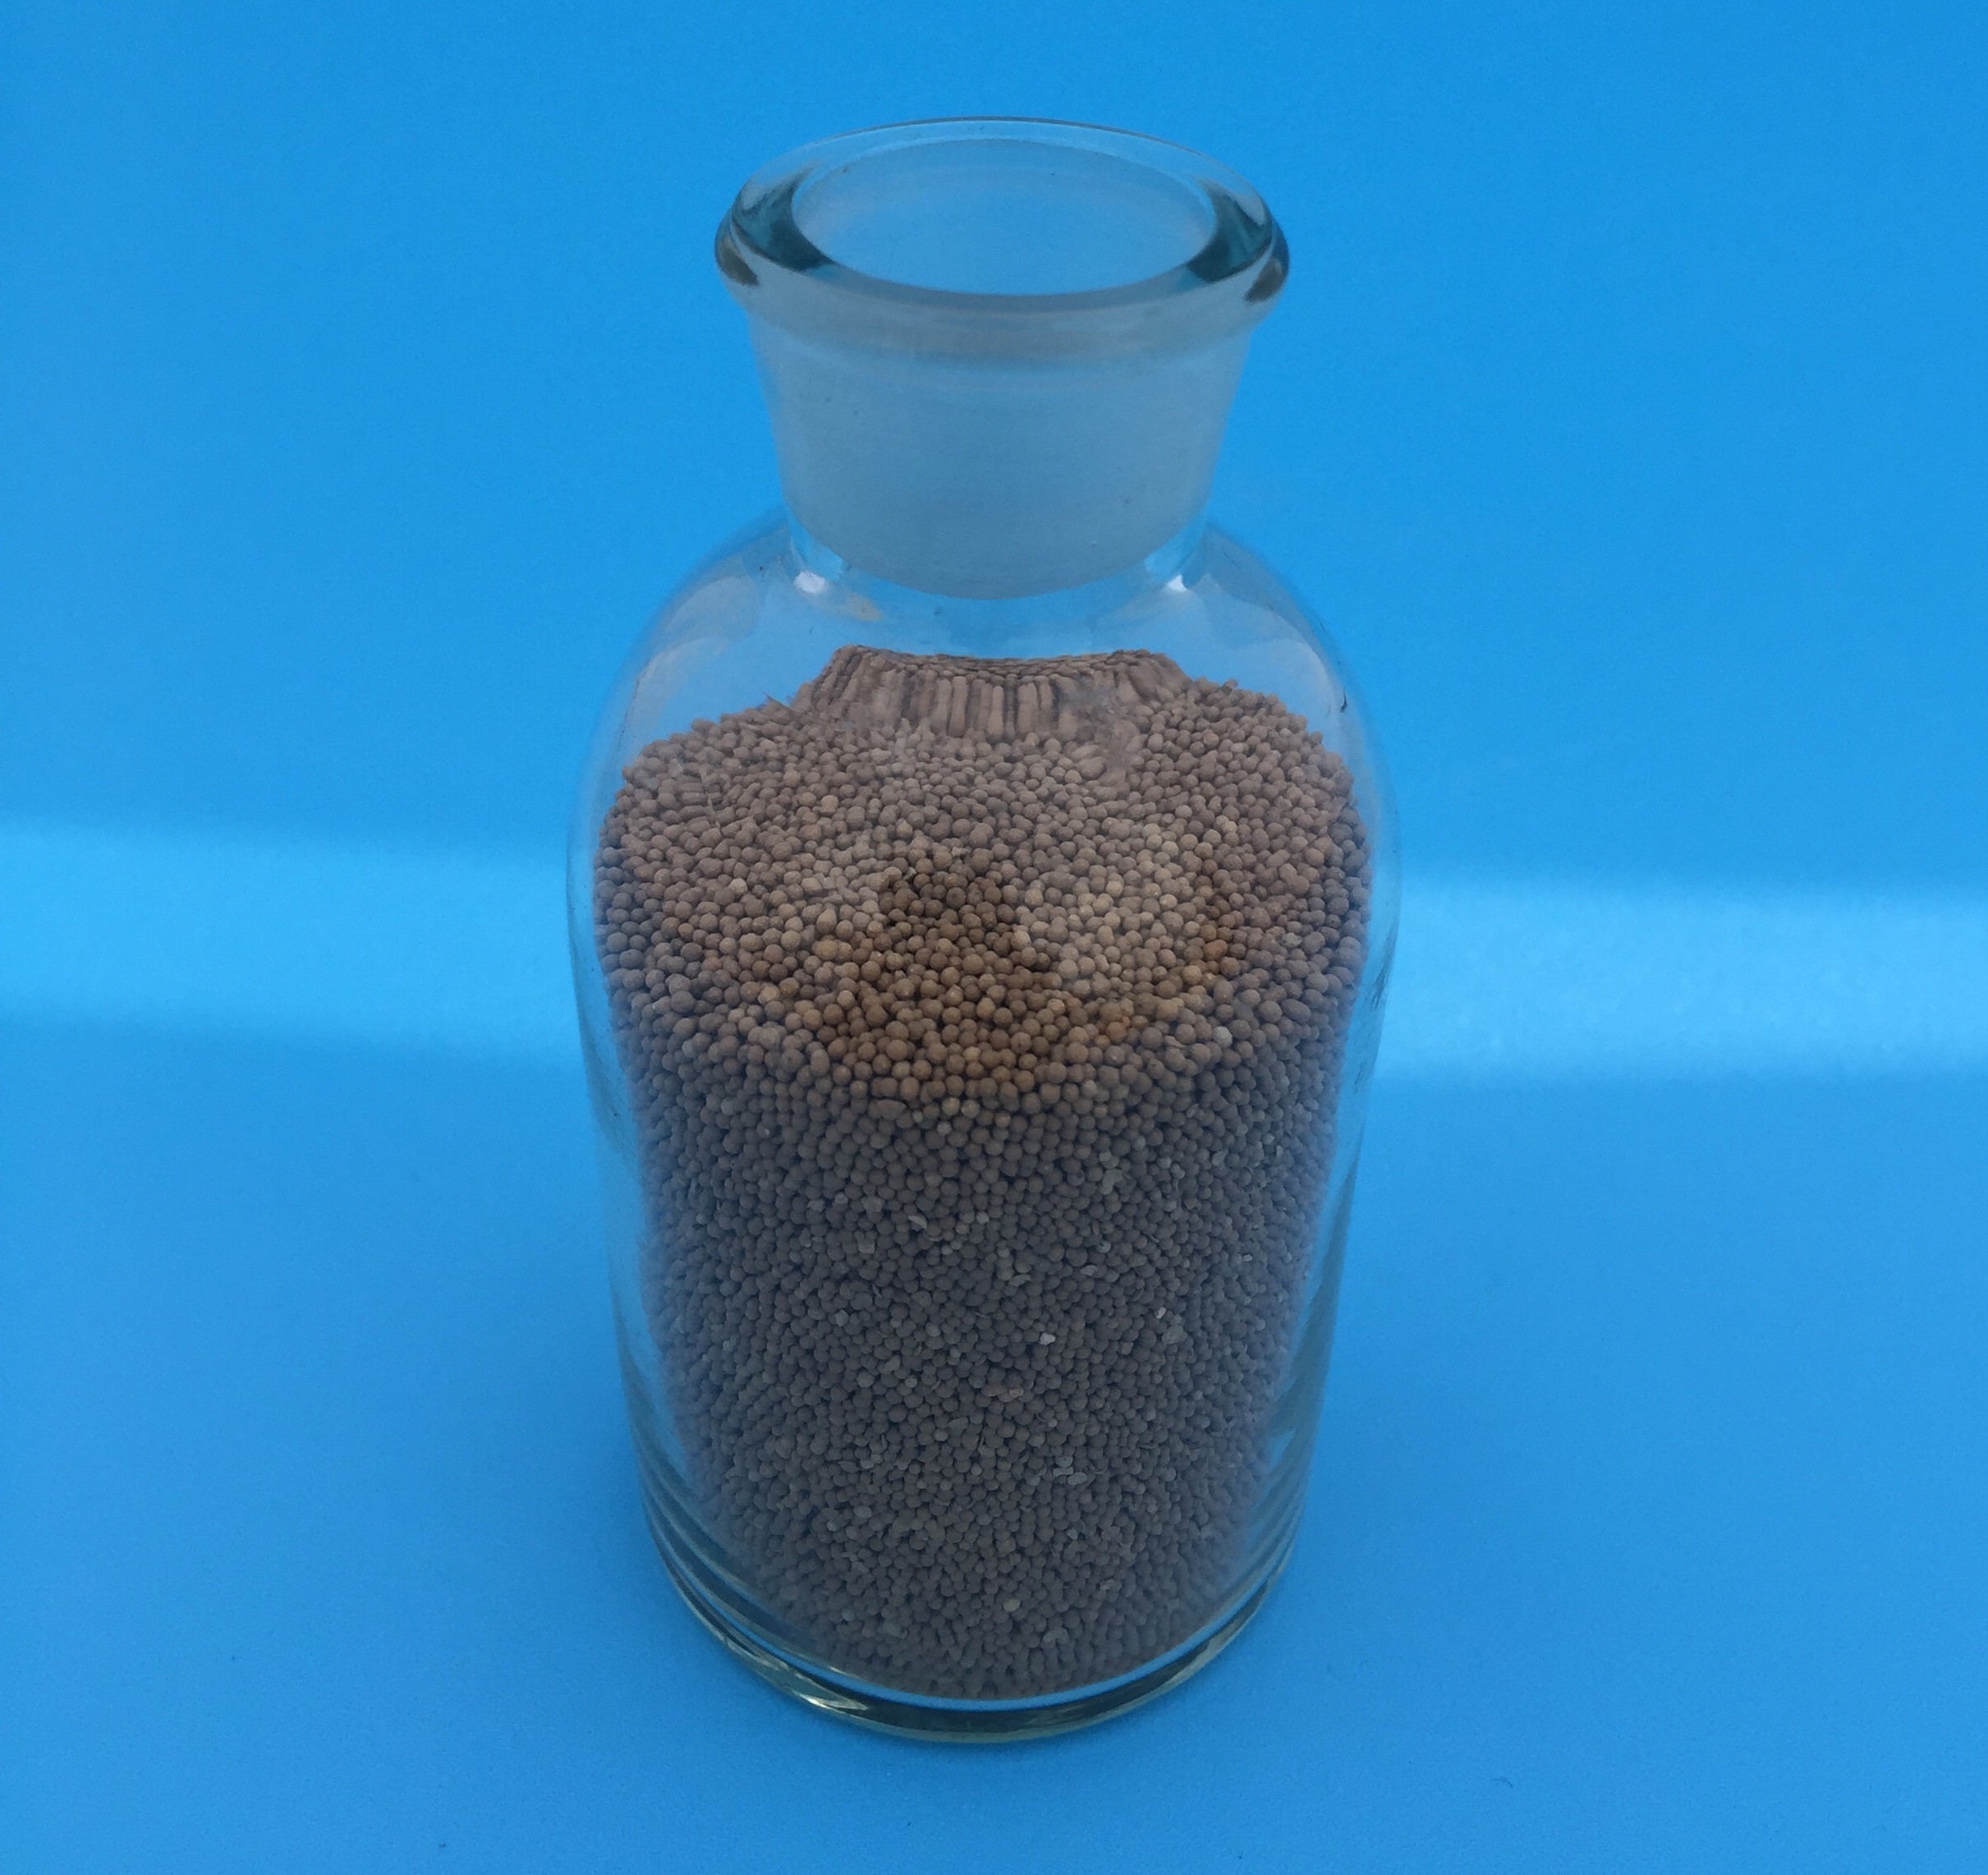 97% Purity Molecular Sieve Desiccant Size 1.0-1.5 Mm 0.75 G/Ml Stacking Density for sale